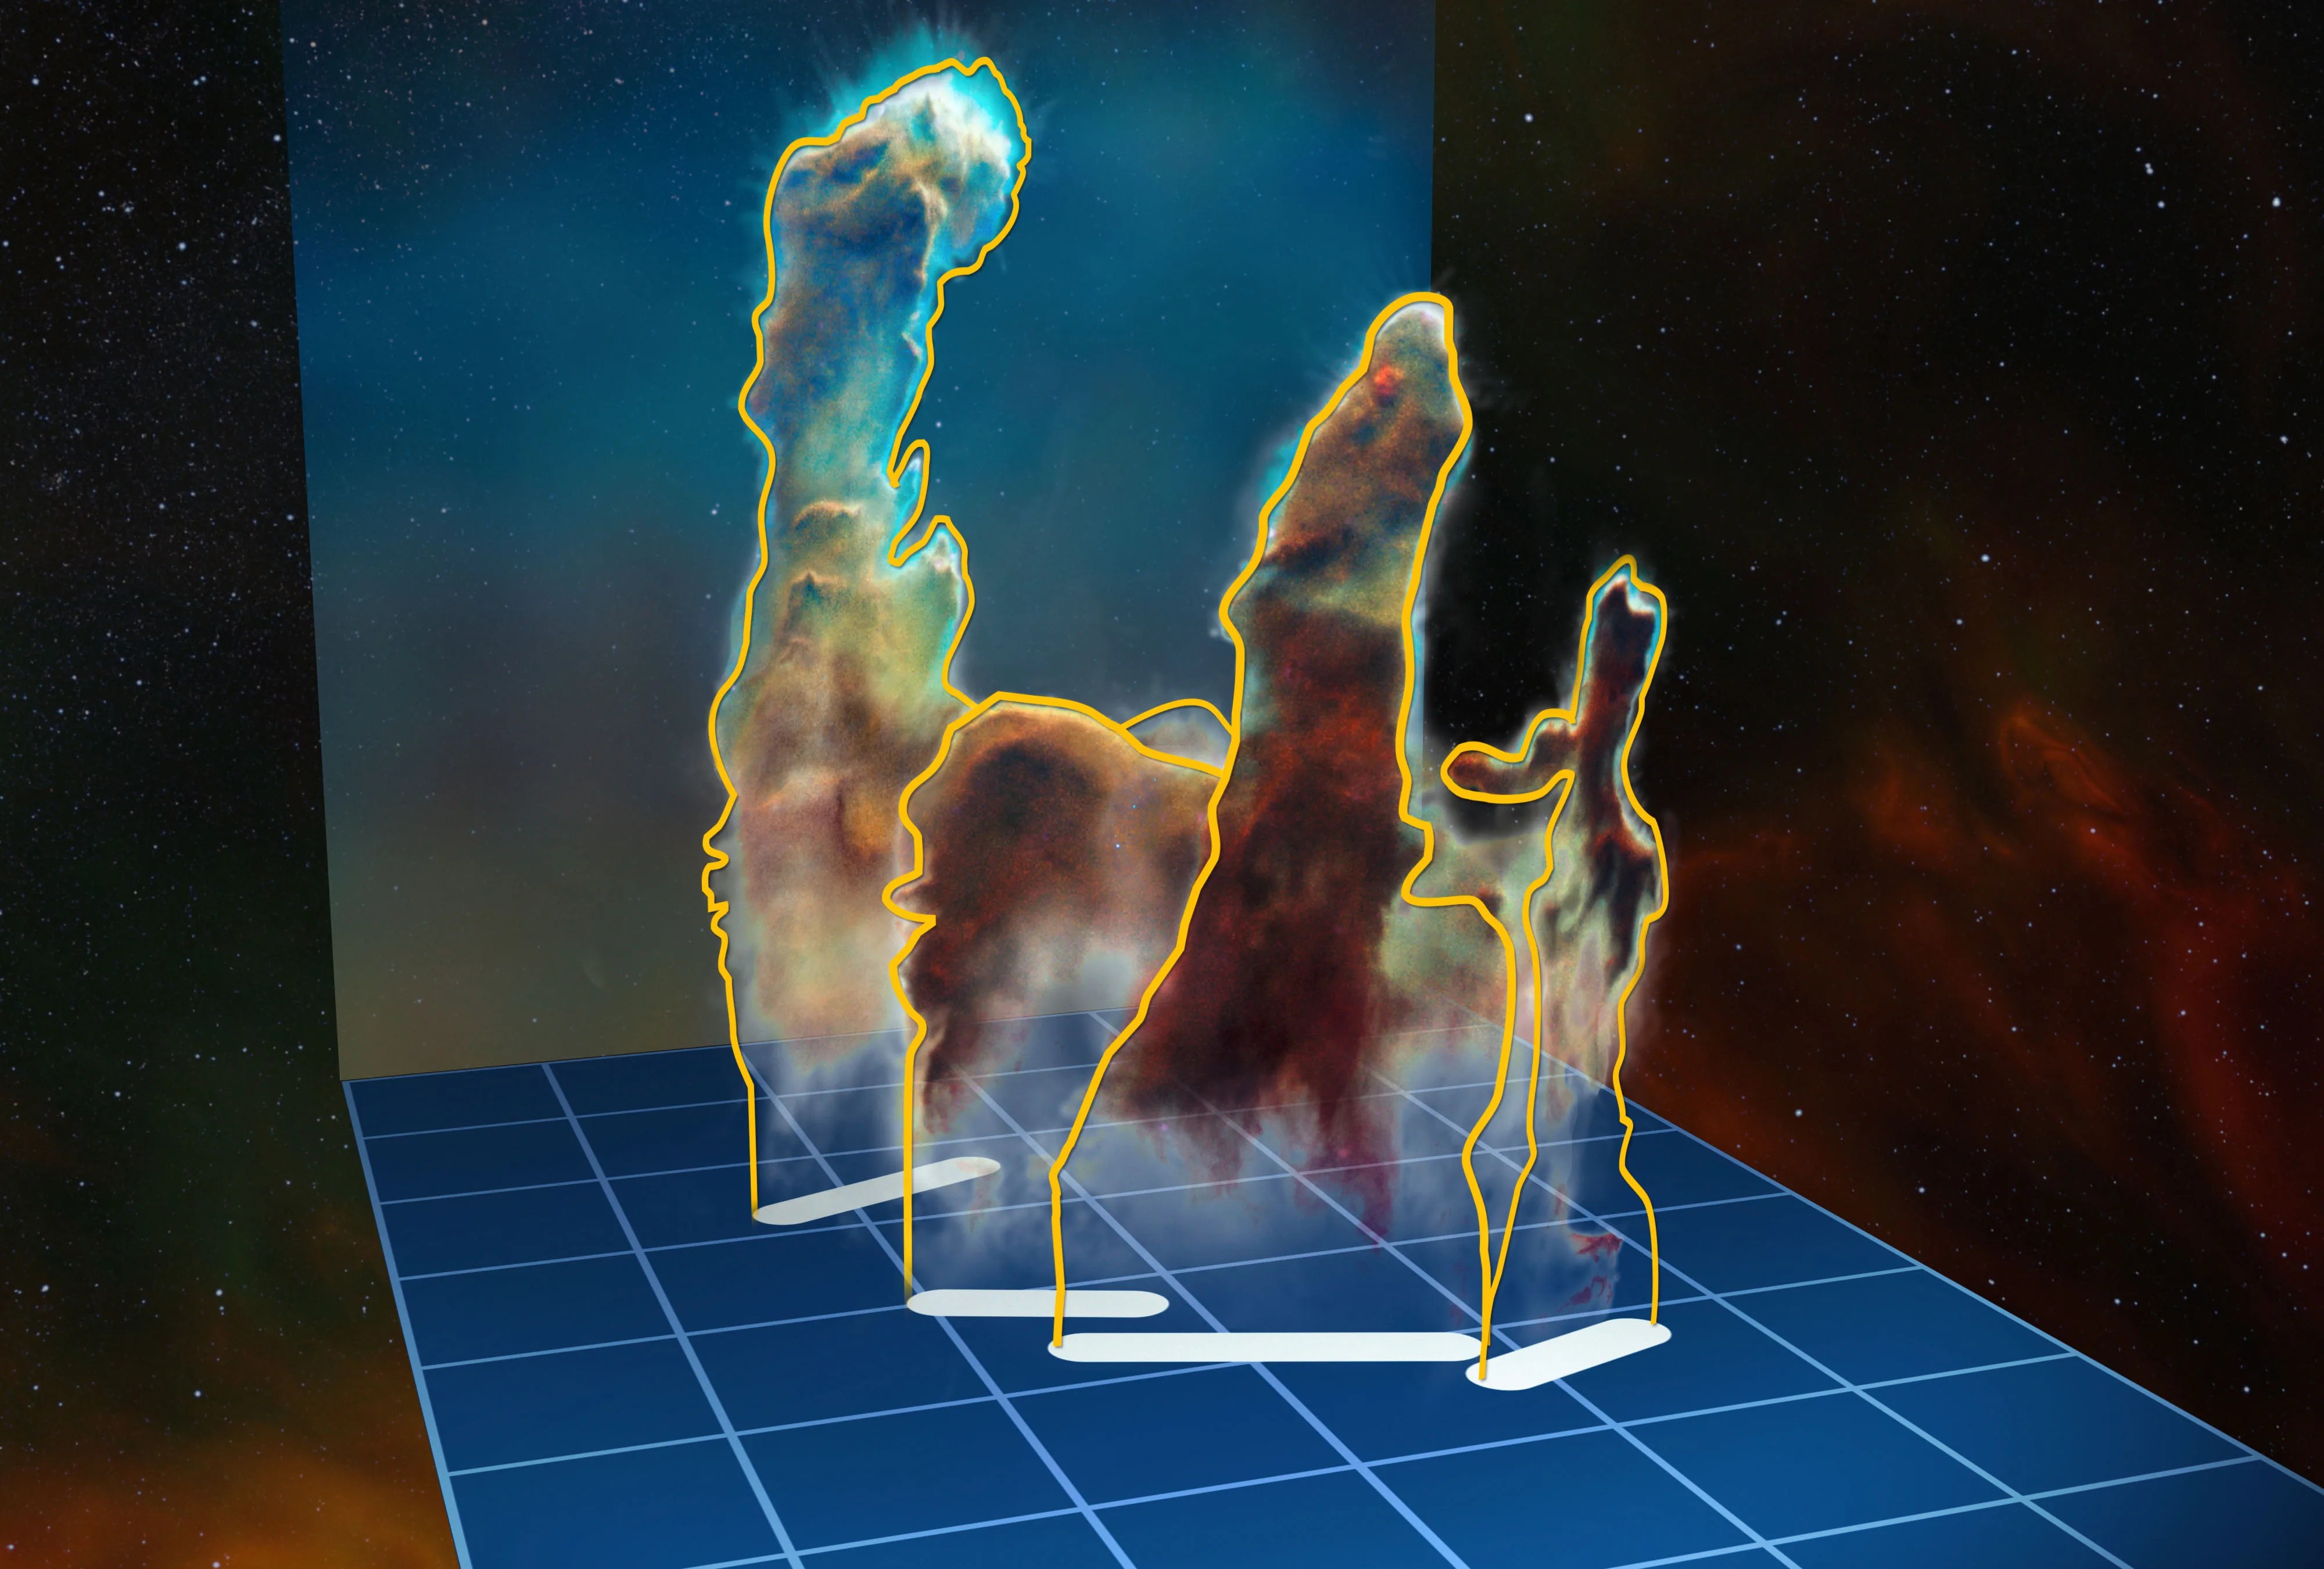 A pop-up book-like 3-d visualization of pillars of creation shows flat, cut-outs of the pillars in separate locations on a graph paper.